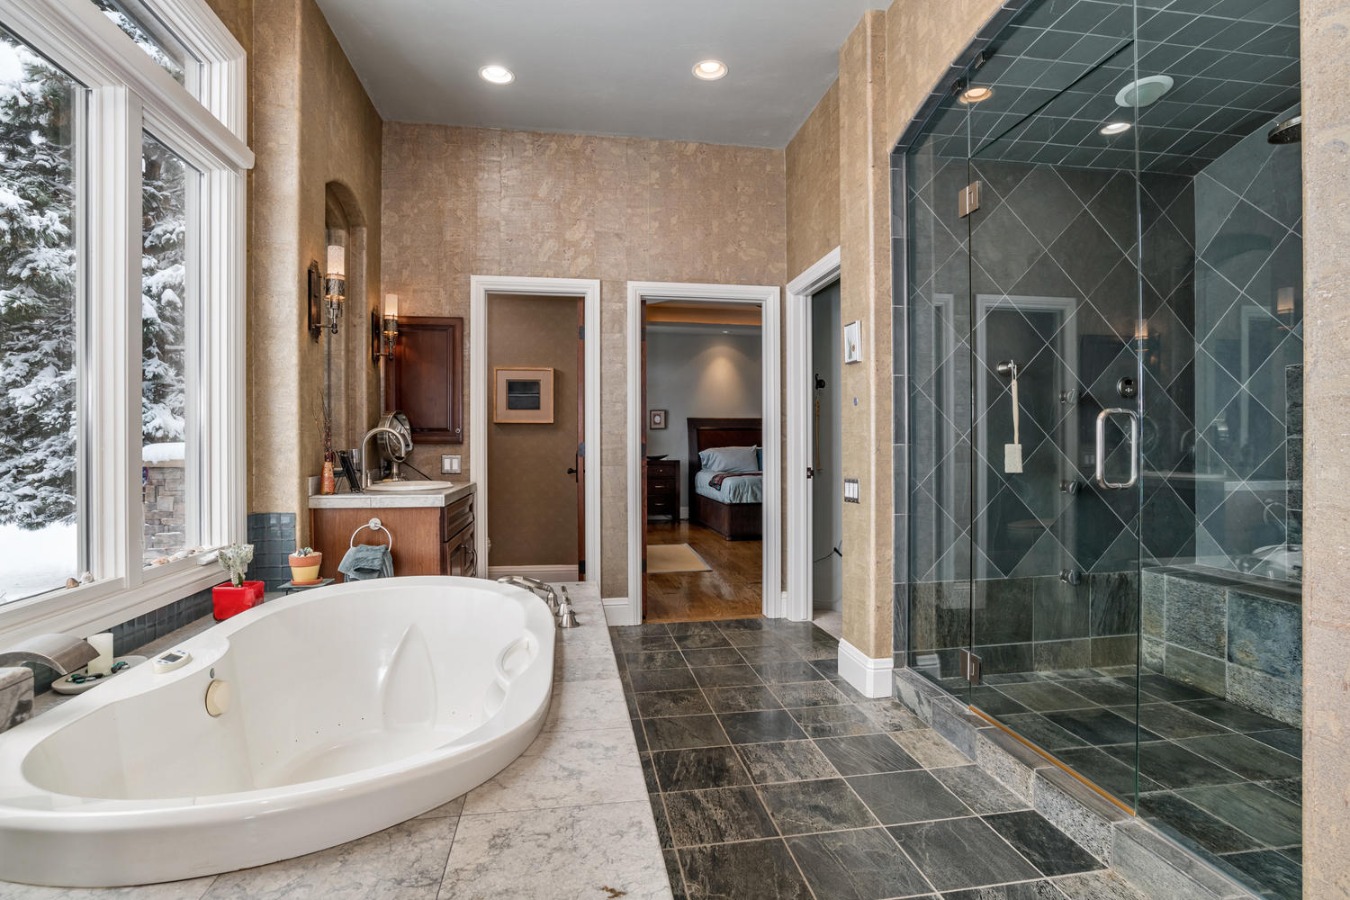 Jetted Soaking Tub & Double Sized Steam Shower